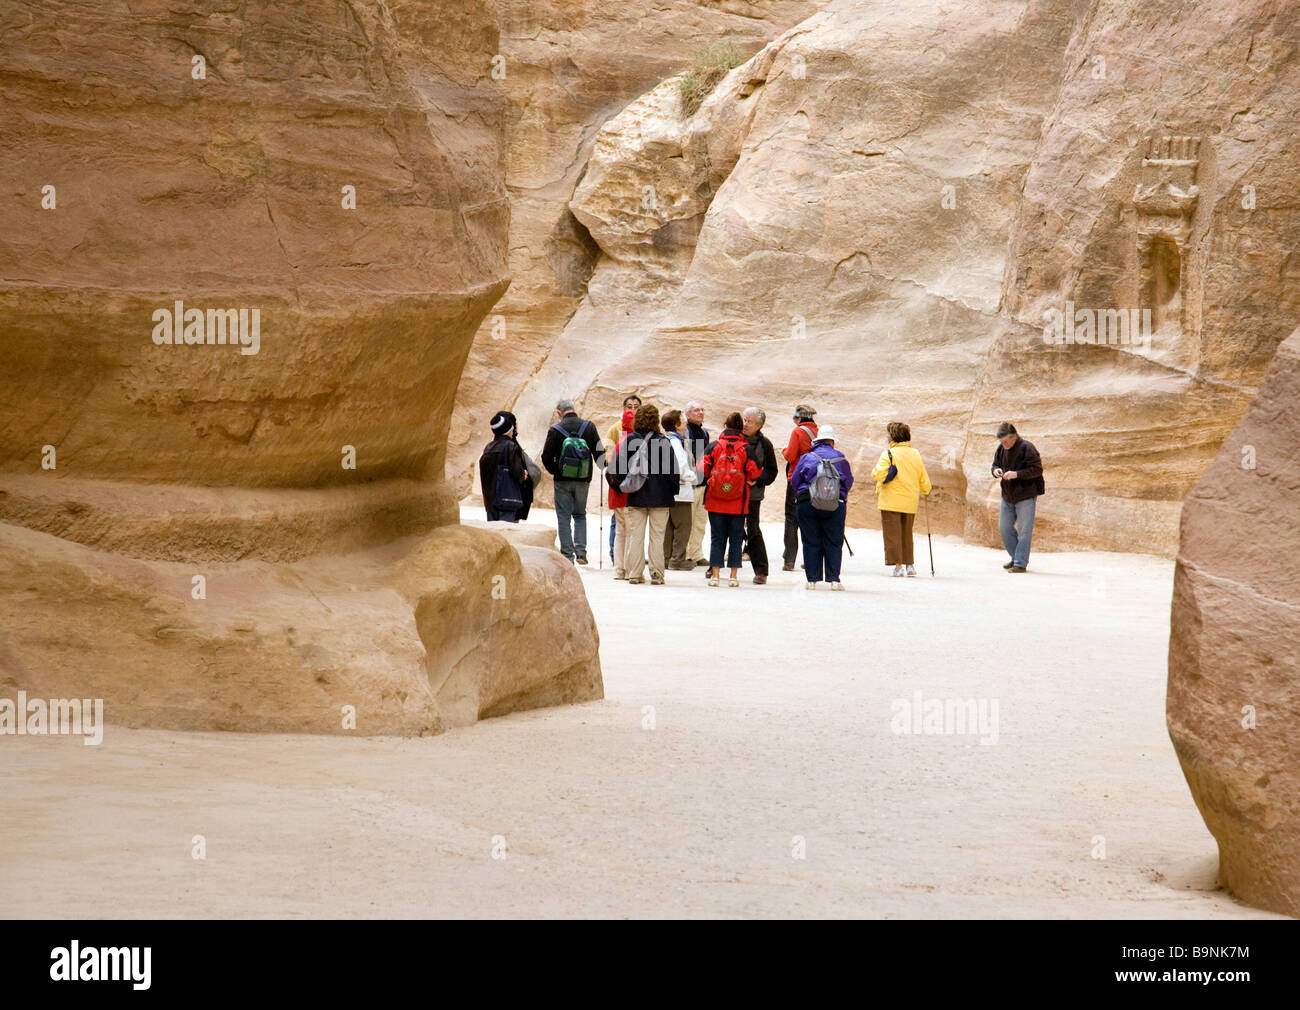 Tourists walking through the siq, past ancient wall carvings, towards the entrance to Petra, Jordan Stock Photo